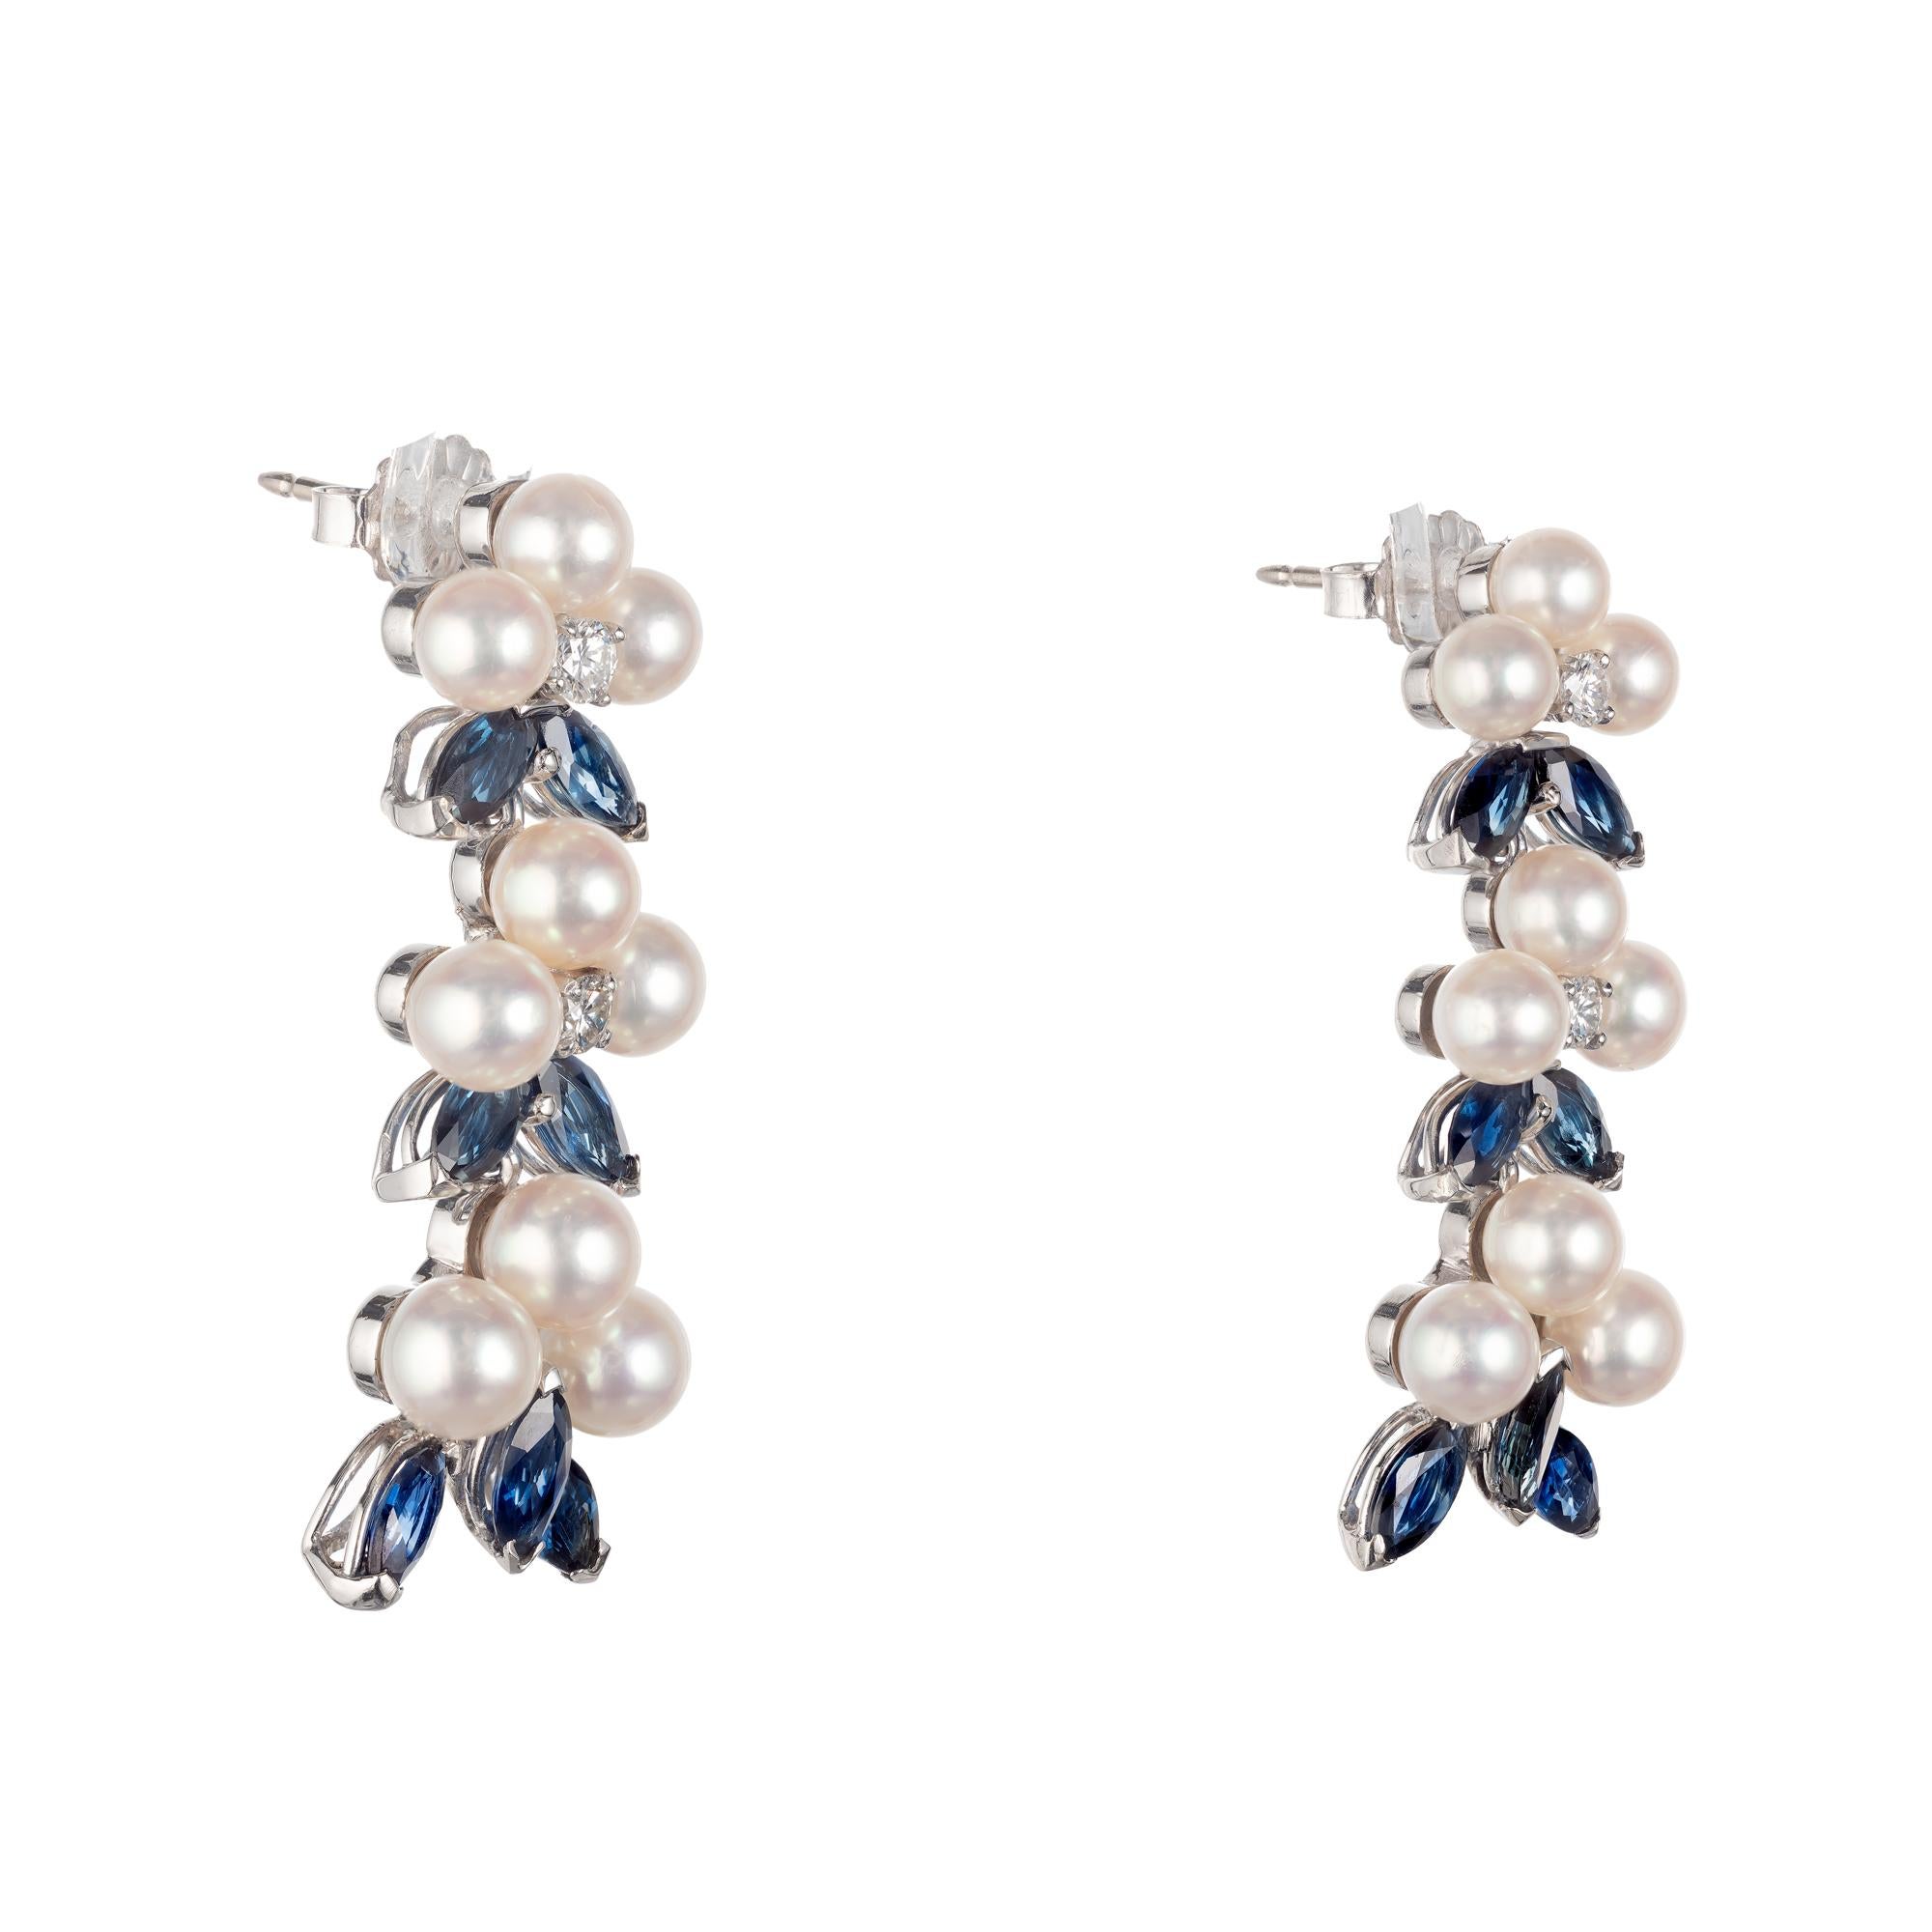  Pearl, Diamond and Sapphire dangle drop earrings. 3 flexible sections with round pearls, round diamonds and marquise sapphires. 

14 Marquise shape blue Sapphires, approx. total weight 3.50cts 
4 round brilliant cut Diamonds, approx. total weight